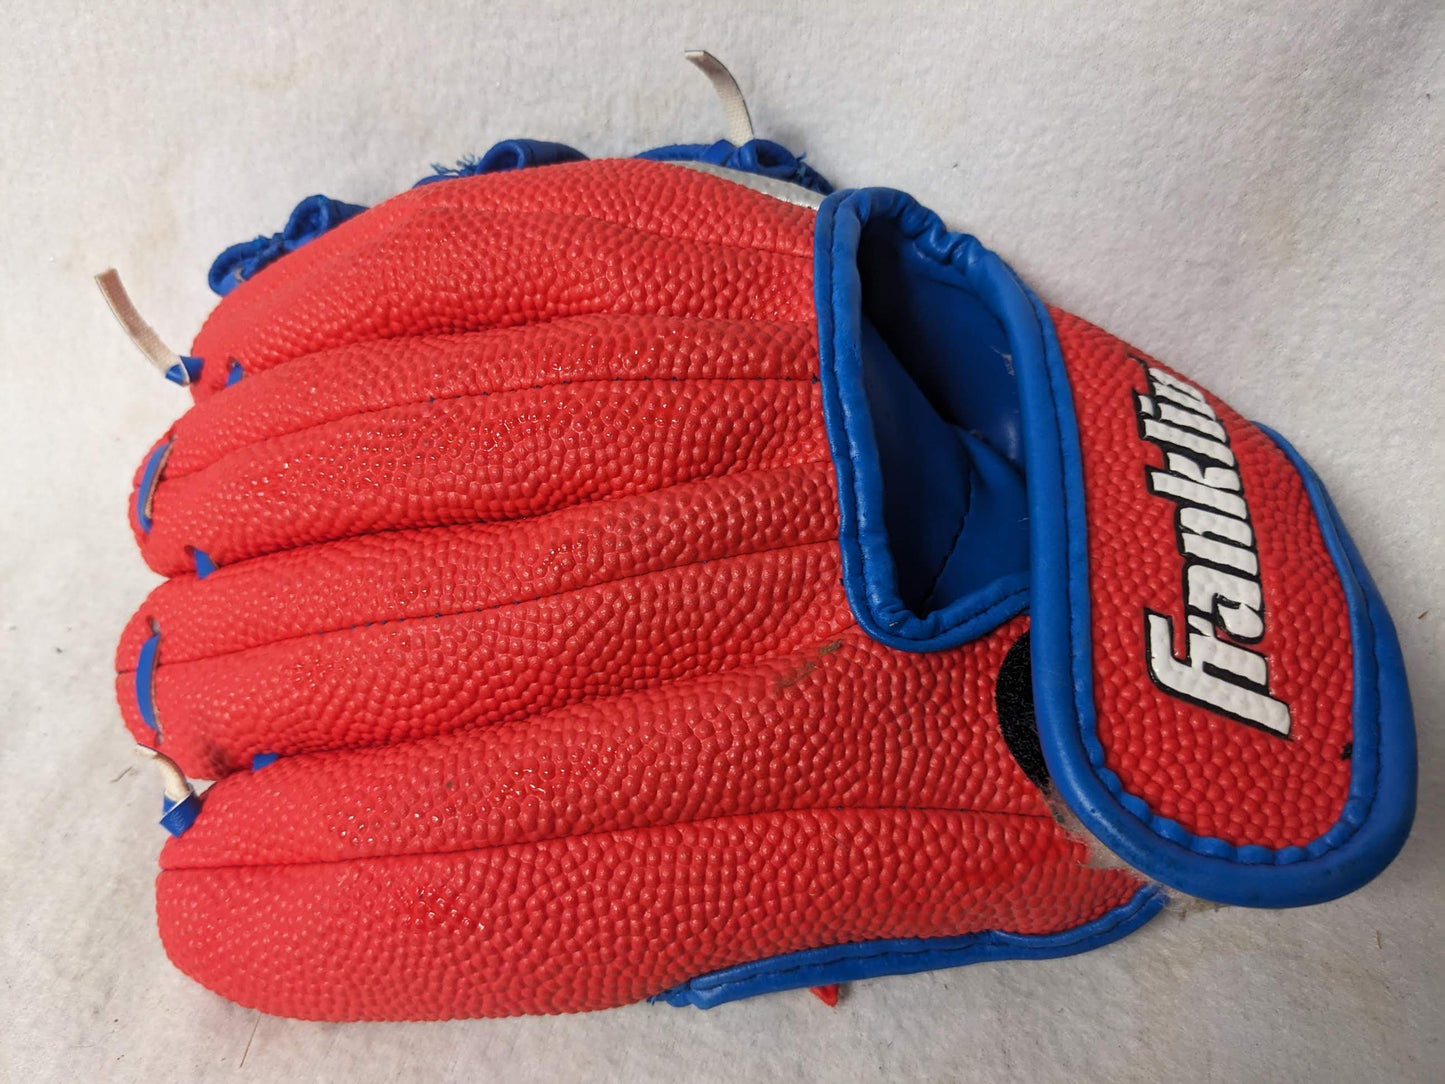 Franklin Baseball Mitt Ready to Play Fielding Glove Mitt Size 9.5 In Left Hand Right Hand Throwing Color Blue Condition Used